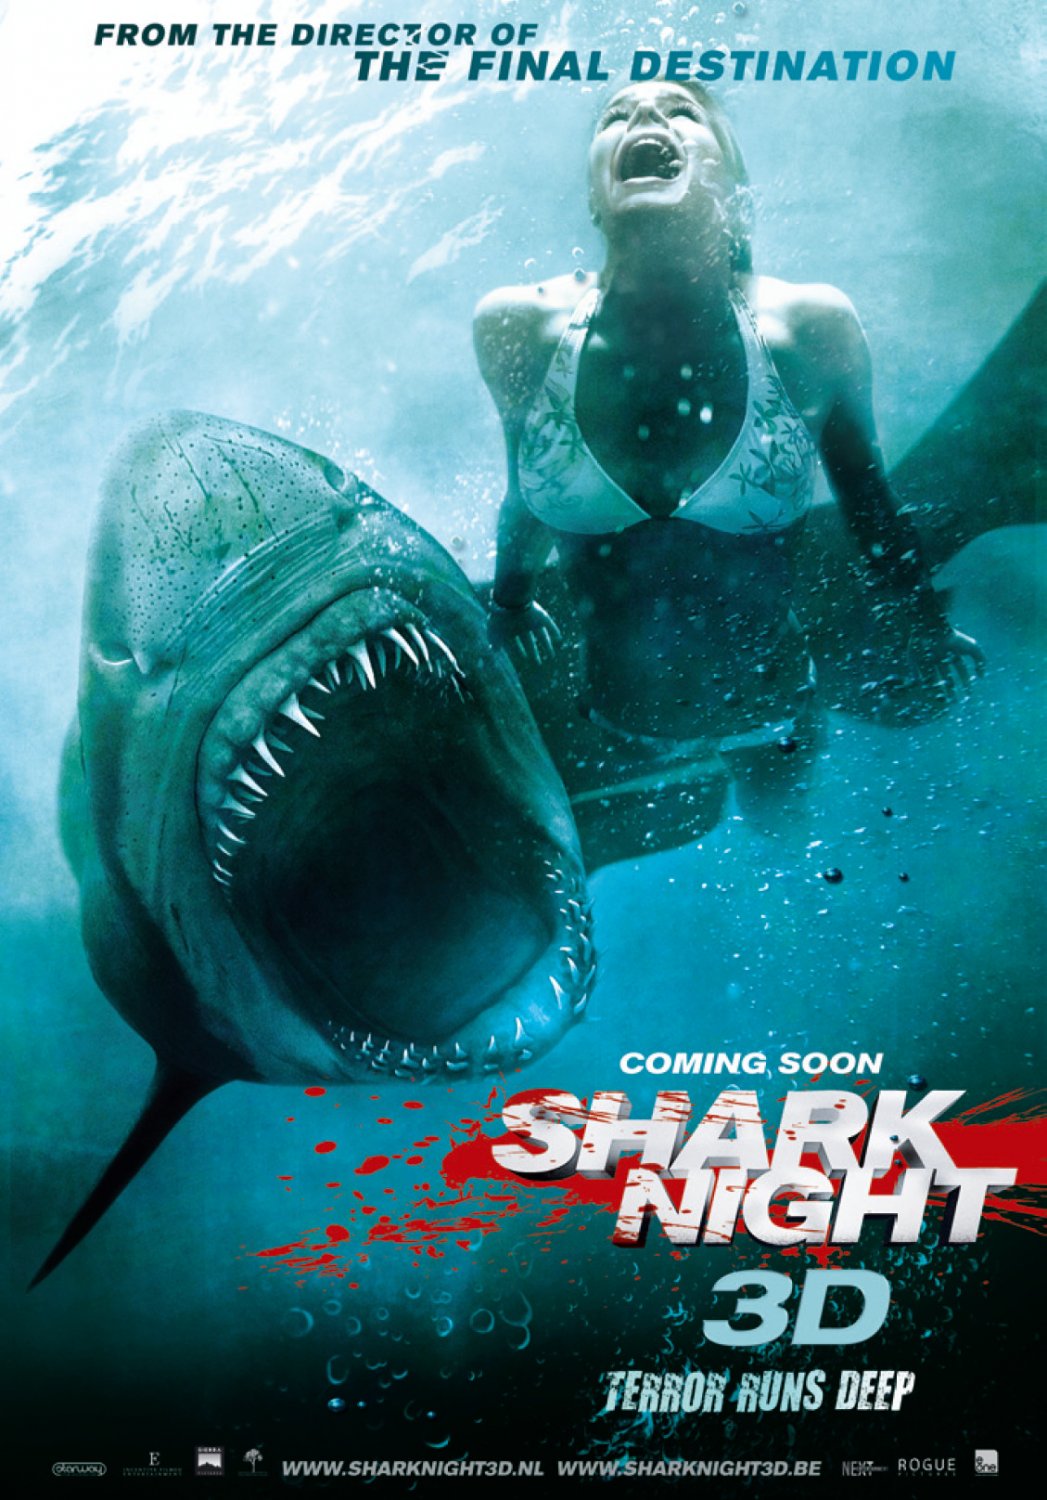 Extra Large Movie Poster Image for Shark Night 3D